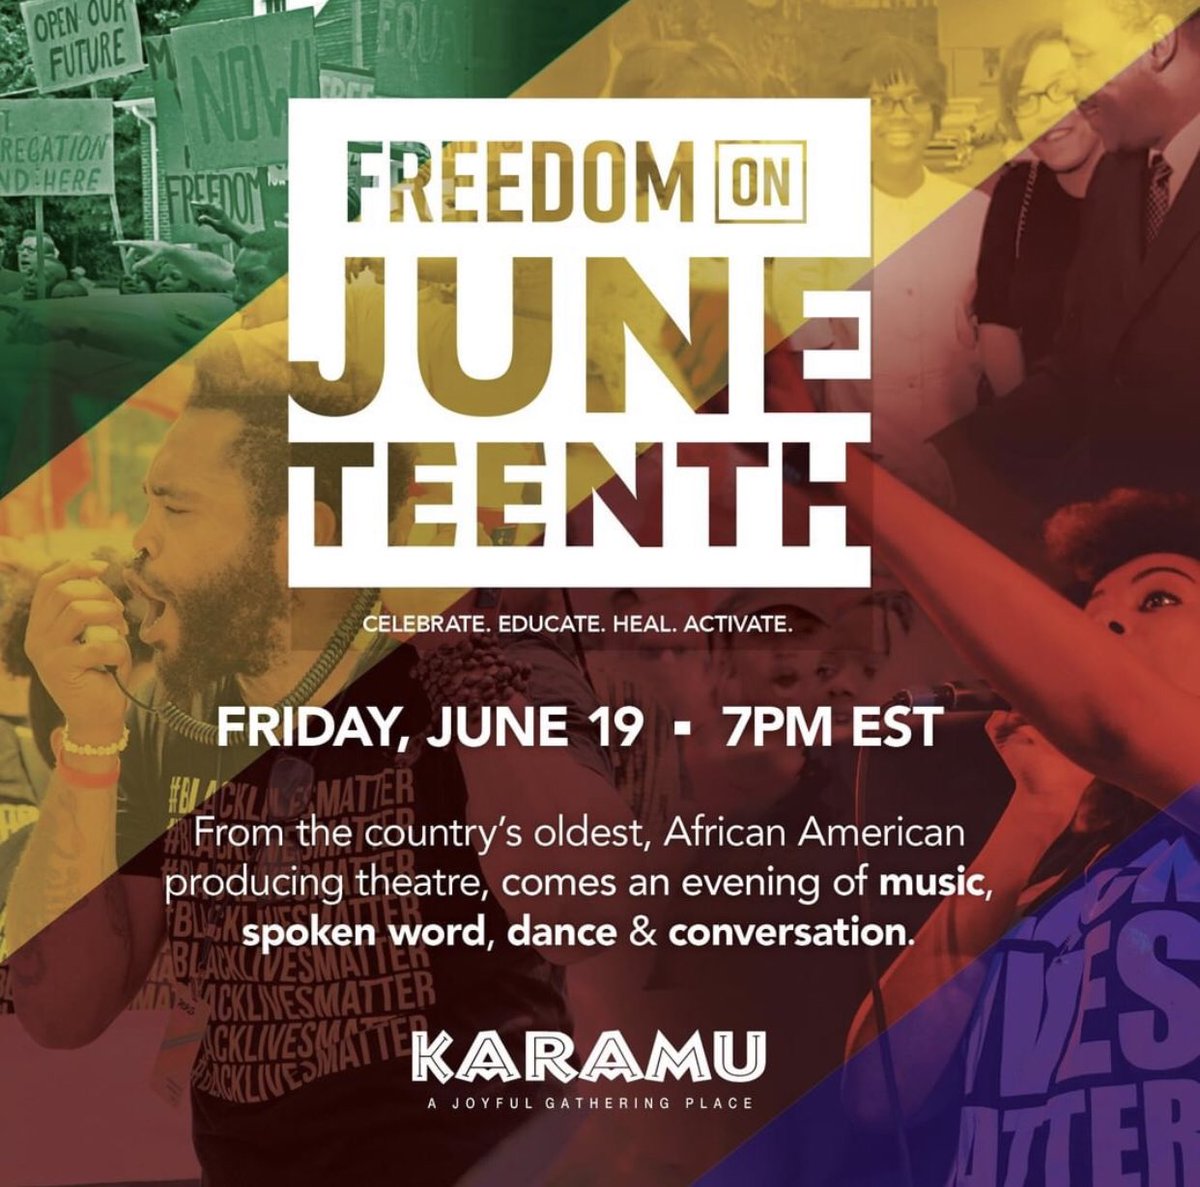 Karamu House will honor Juneteenth w/ a new performance titled “Freedom on Juneteenth.” The pre-recorded program will air on Karamu’s Facebook and YouTube channels at 7 p.m. The show will also be streamed on Vimeo, Roku and Fire TV and rebroadcast on WVIZ Ideastream in mid-July.